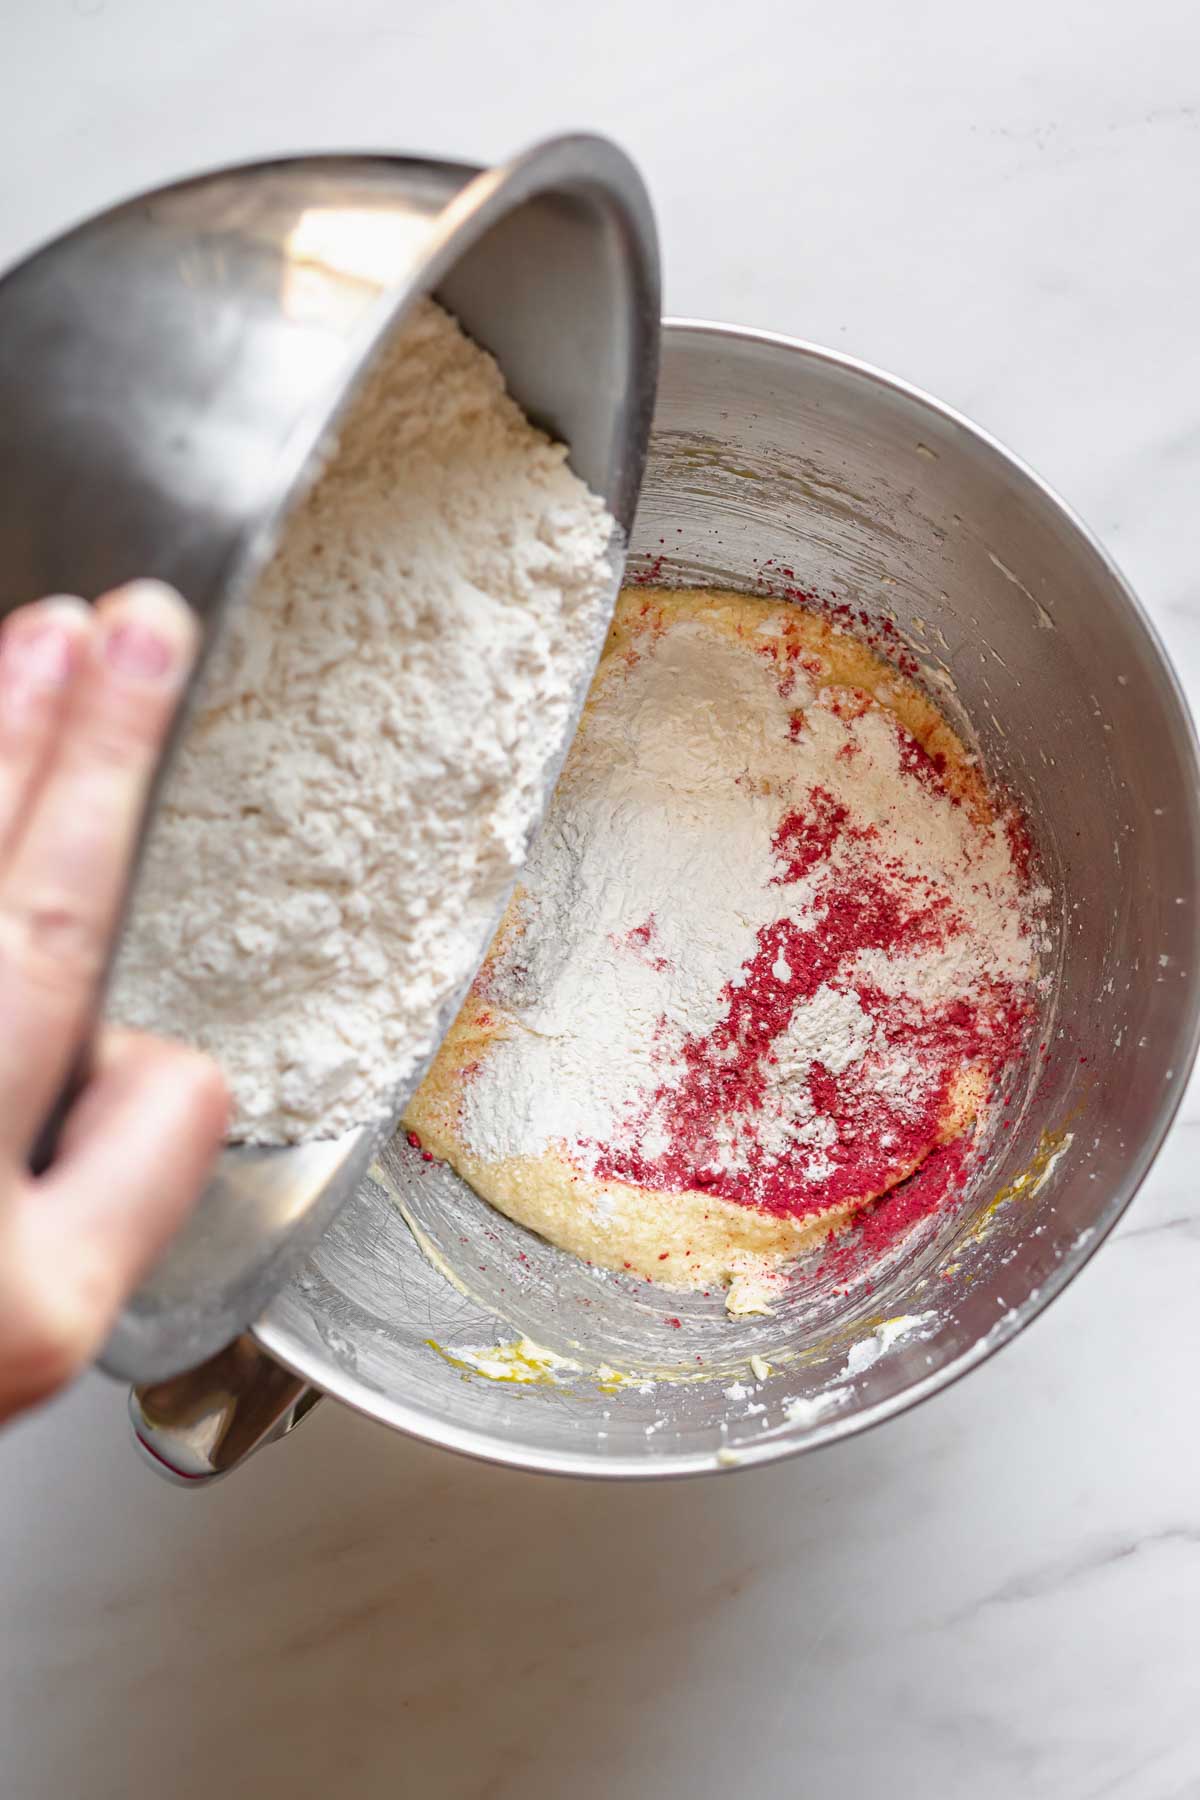 Flour getting poured into strawberry cake batter.